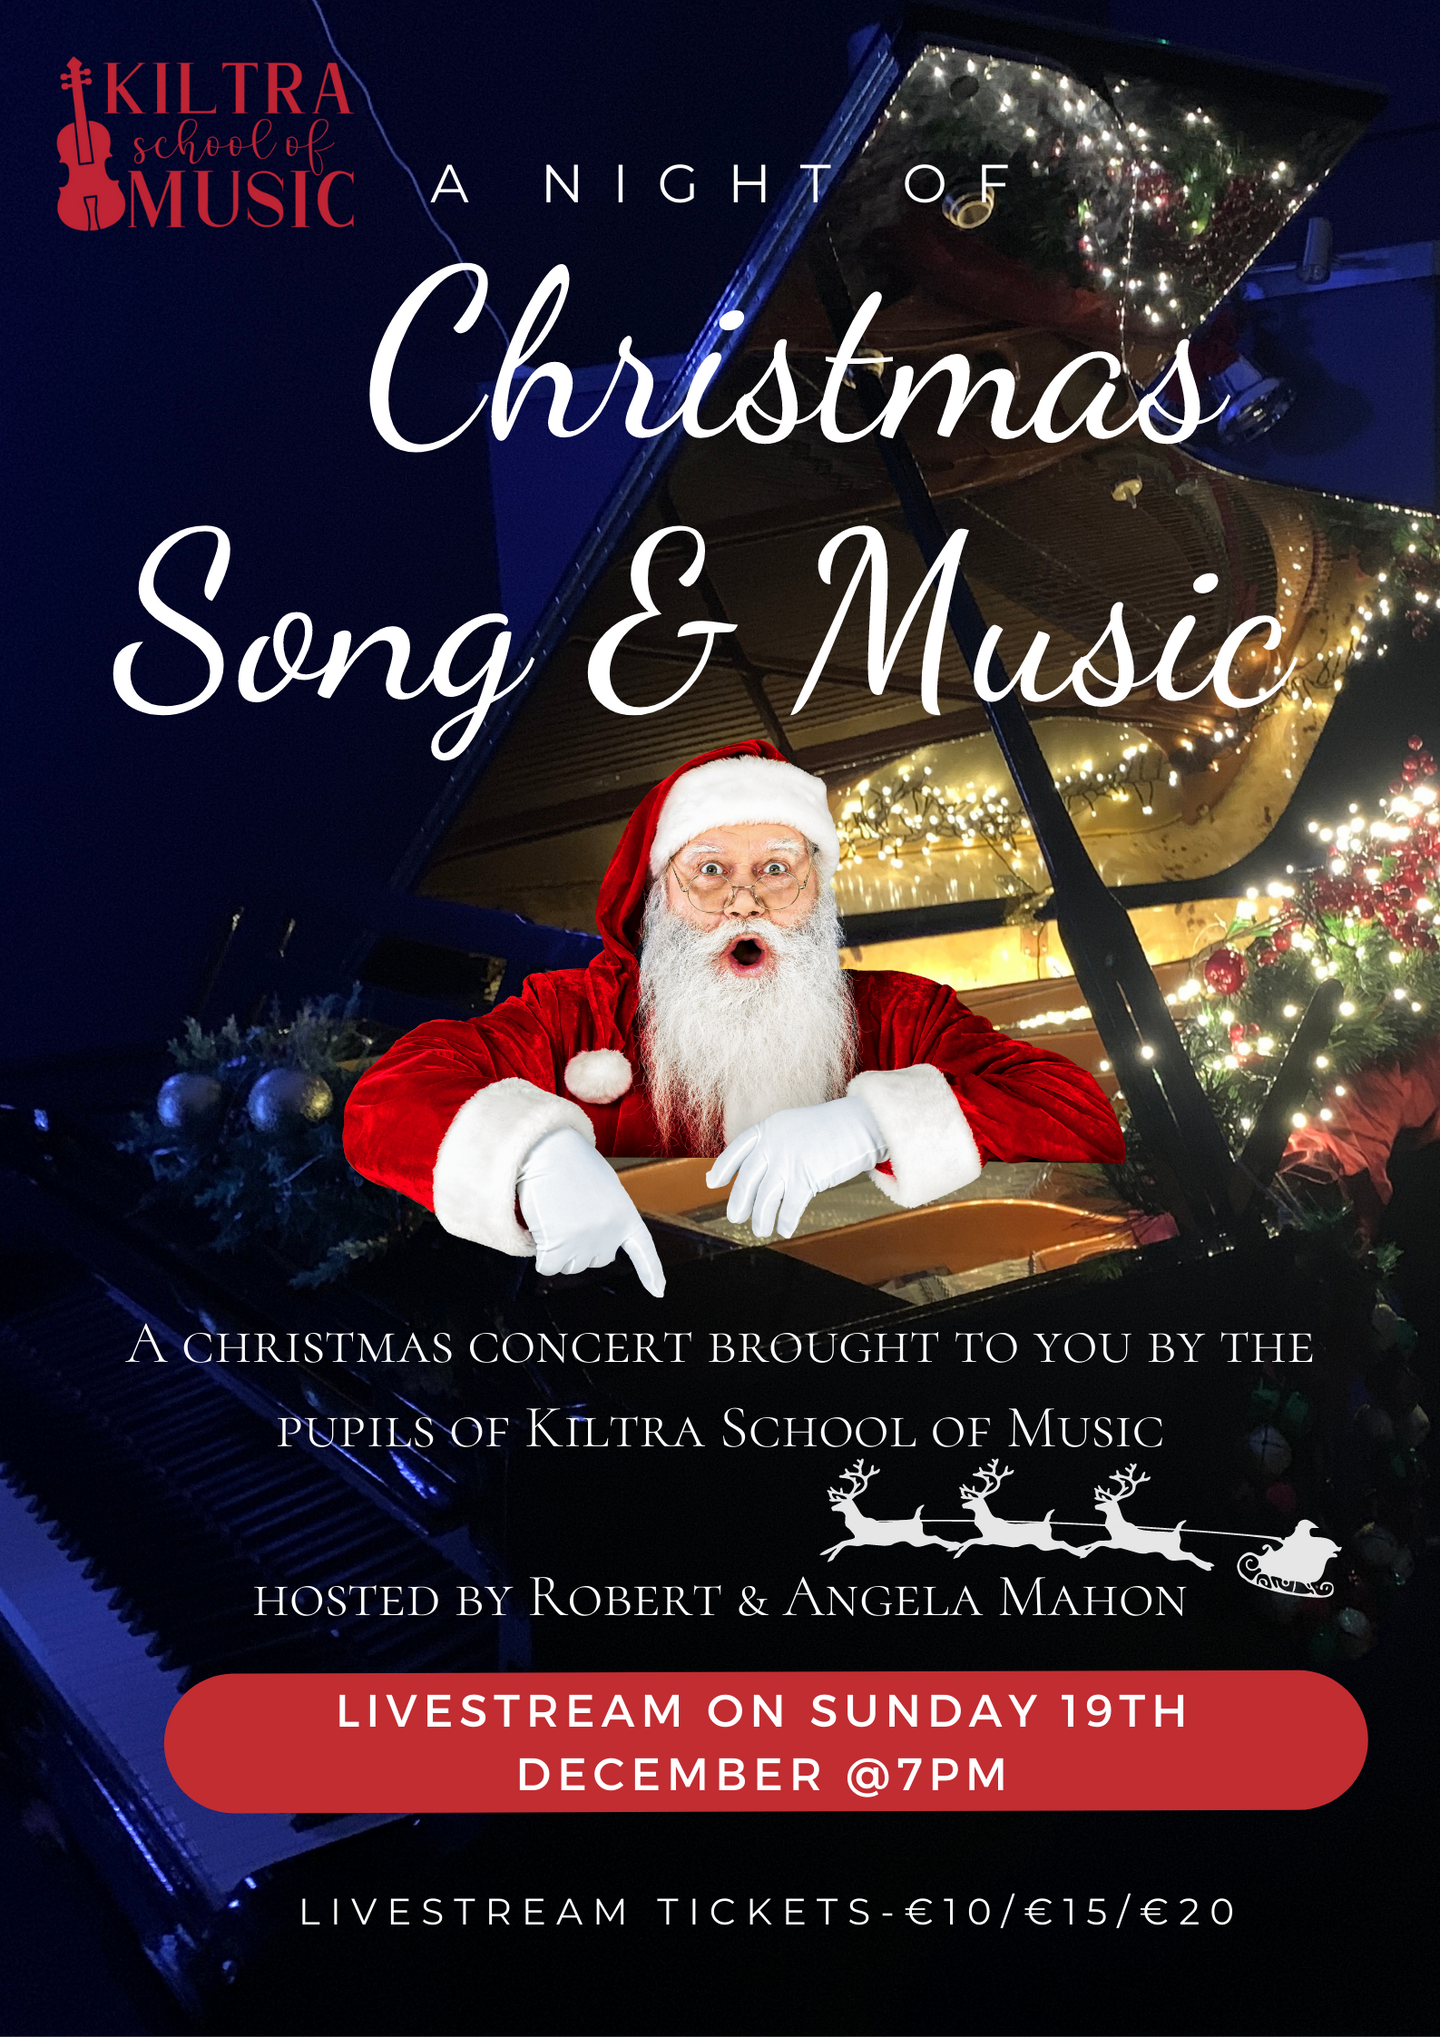 A Night of Christmas Song & Music-Livestream